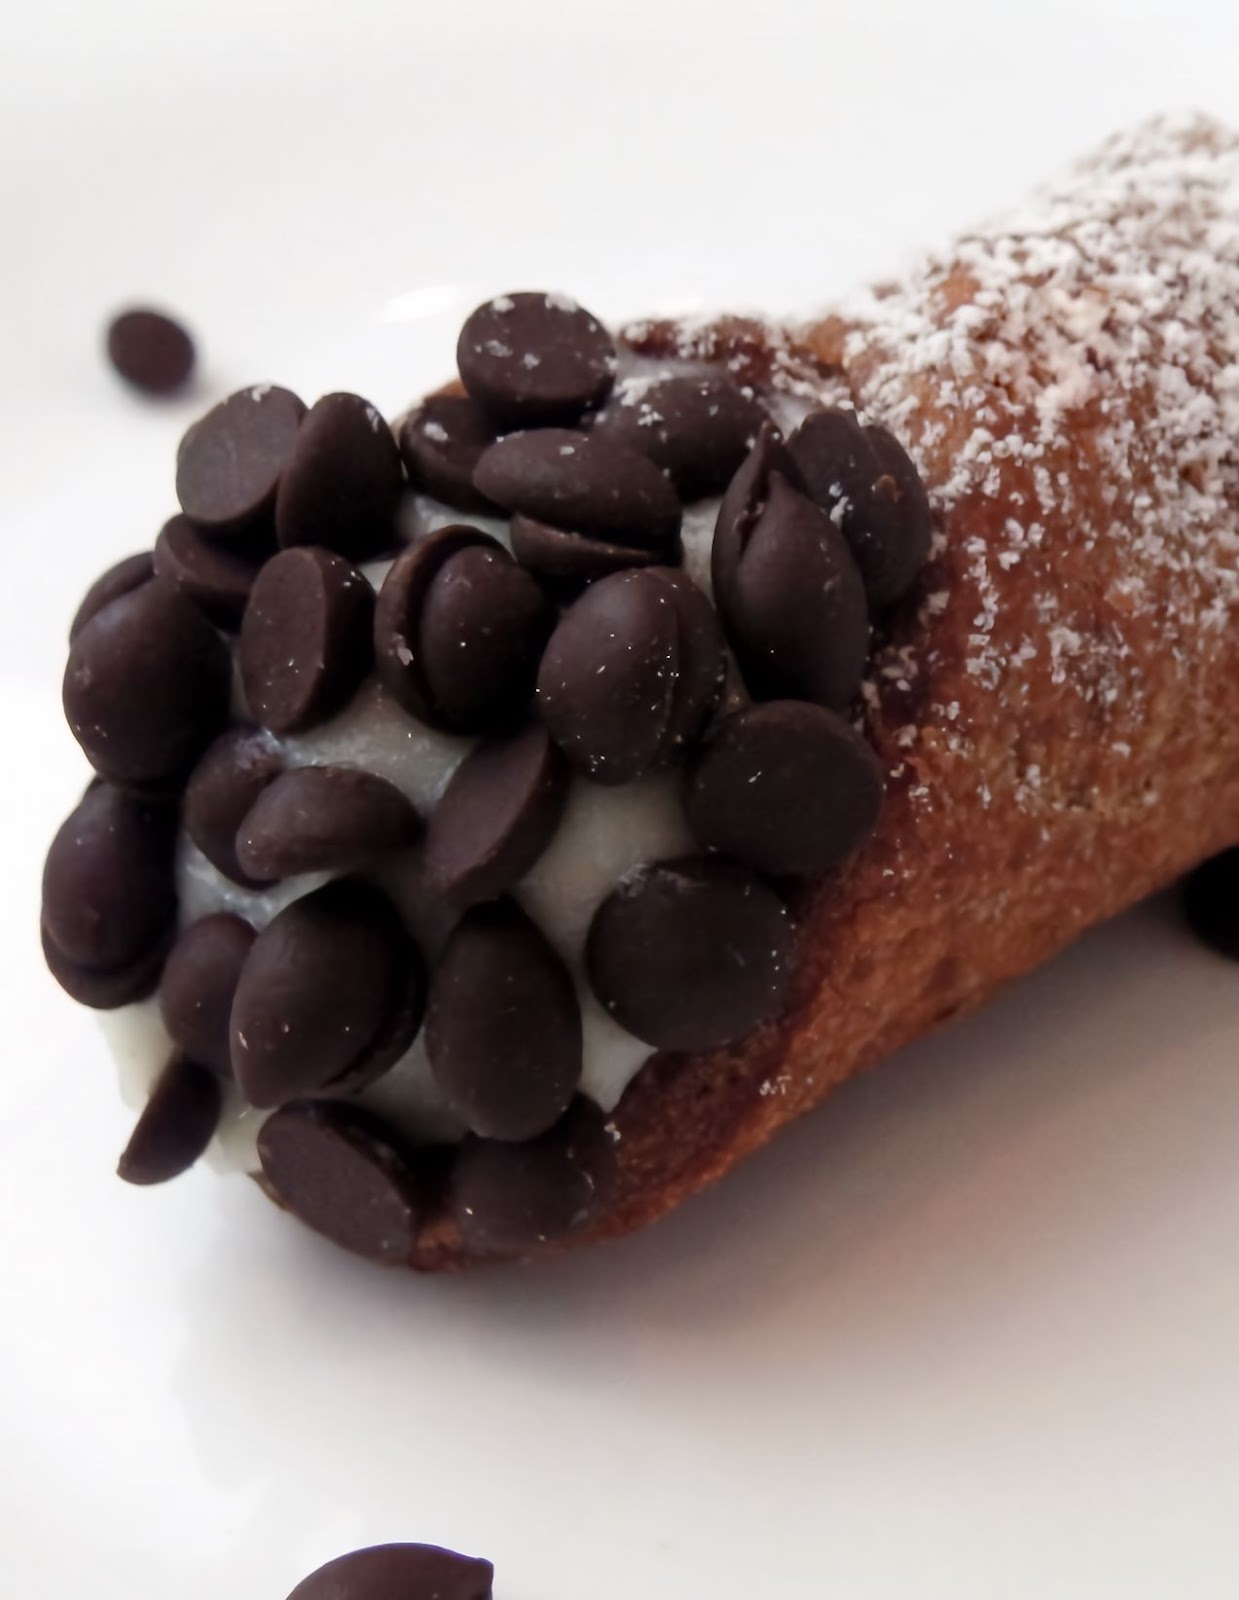 chocolate chip ricotta-filled cannolis